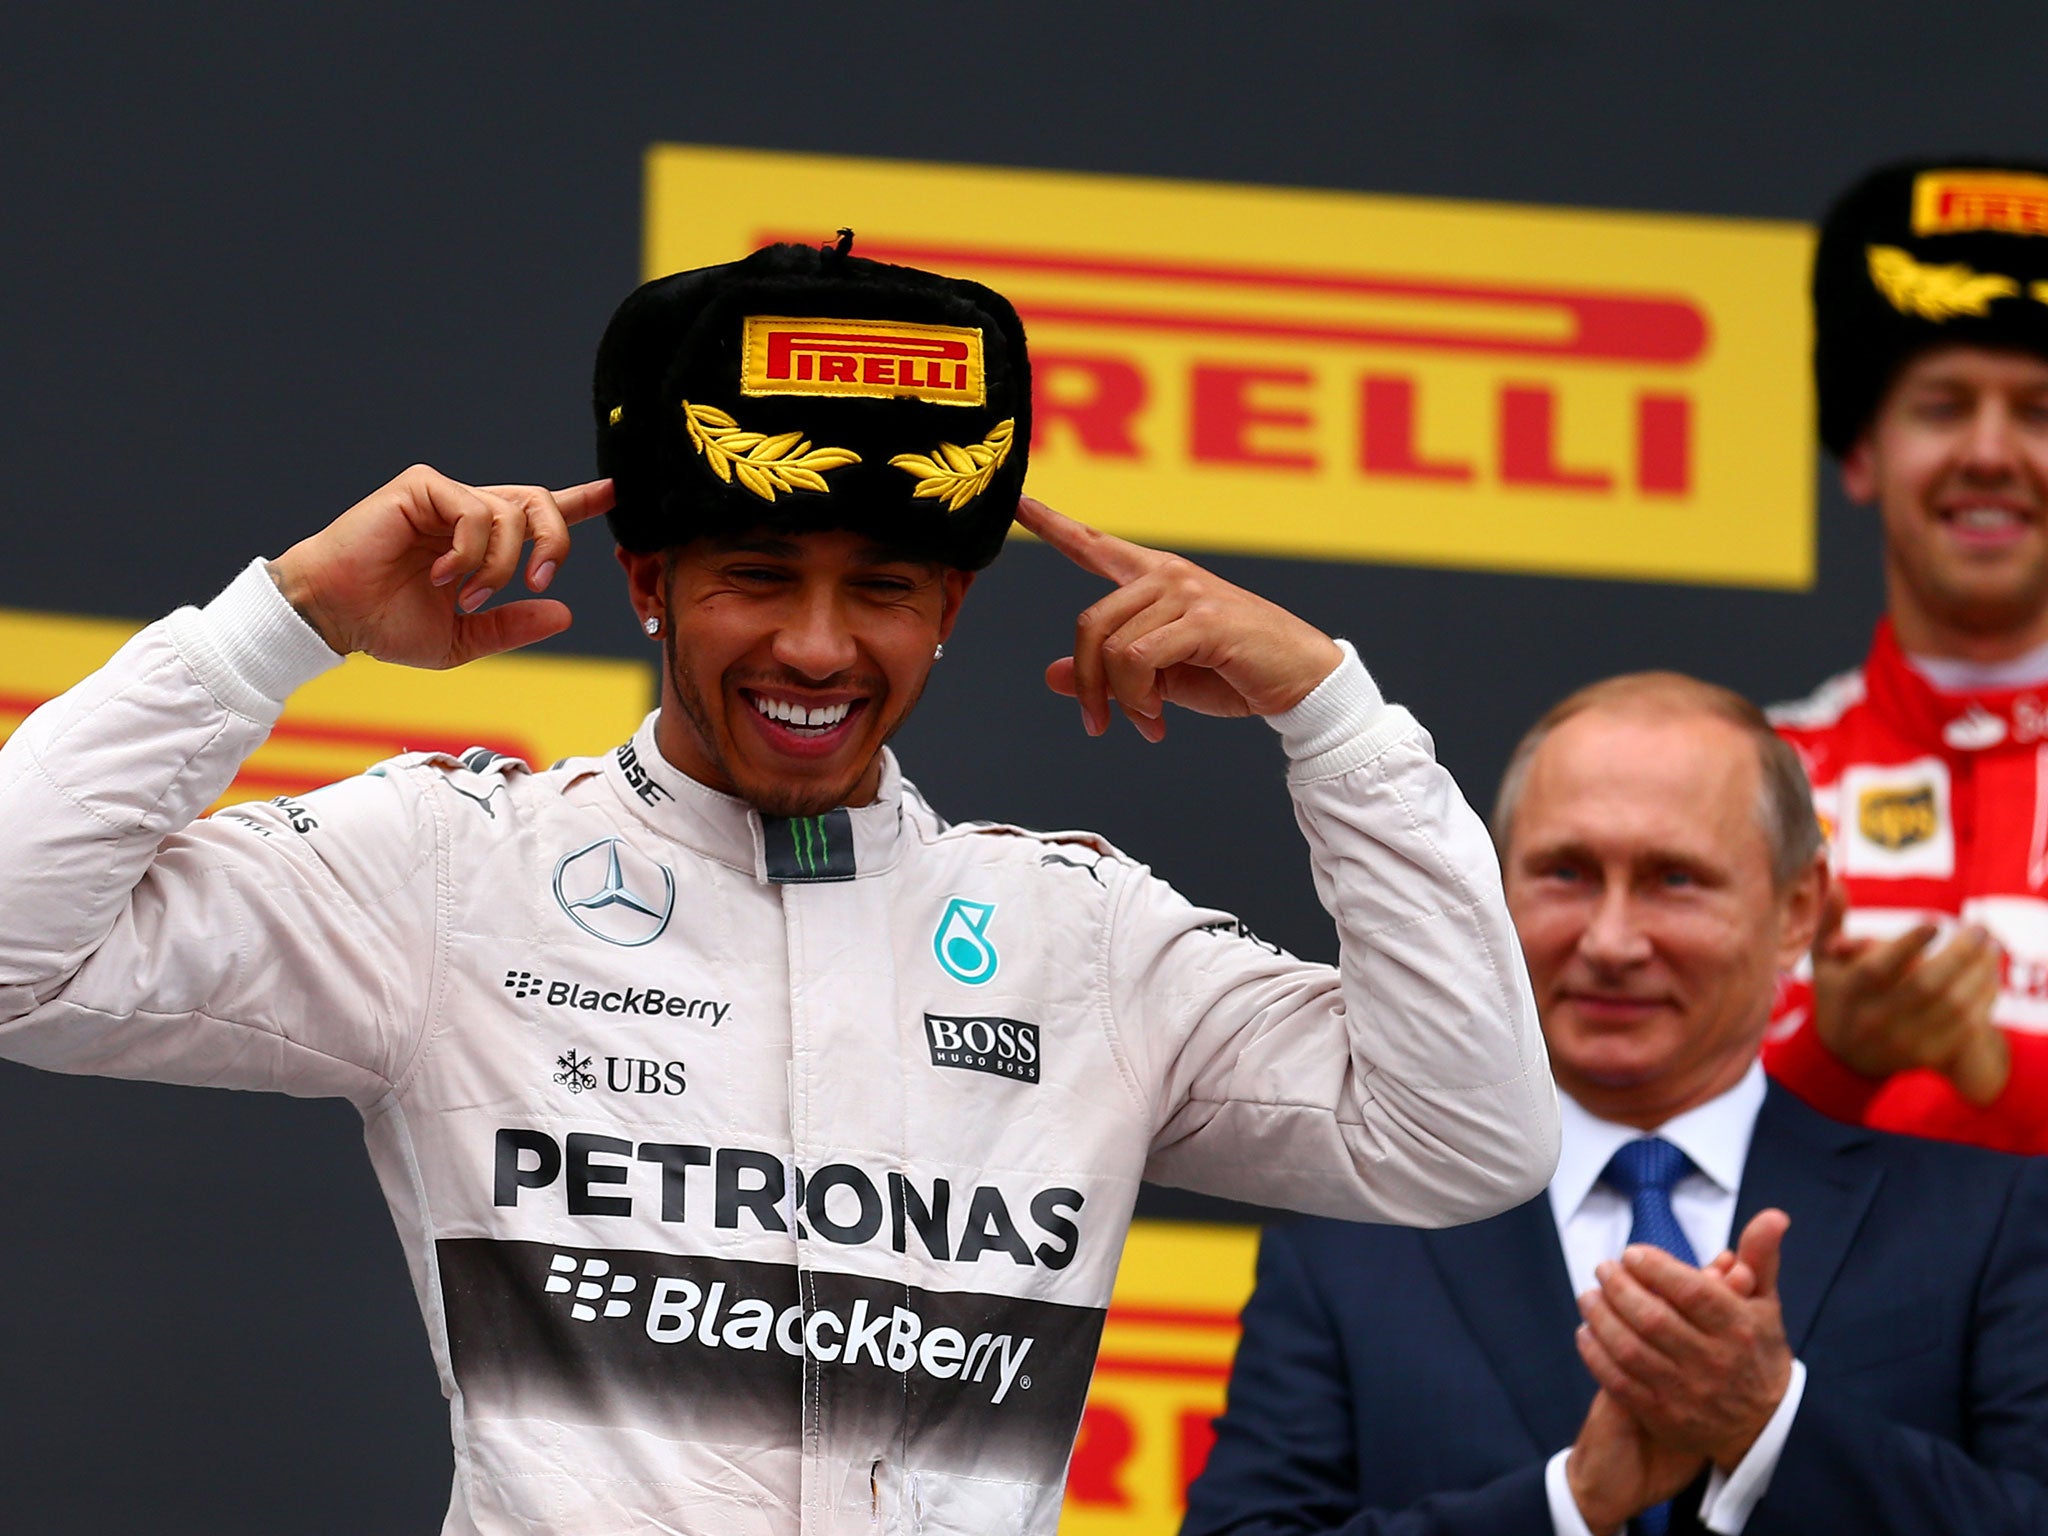 Lewis Hamilton sports a special Russian-themed Pirelli hat after winning in Sochi